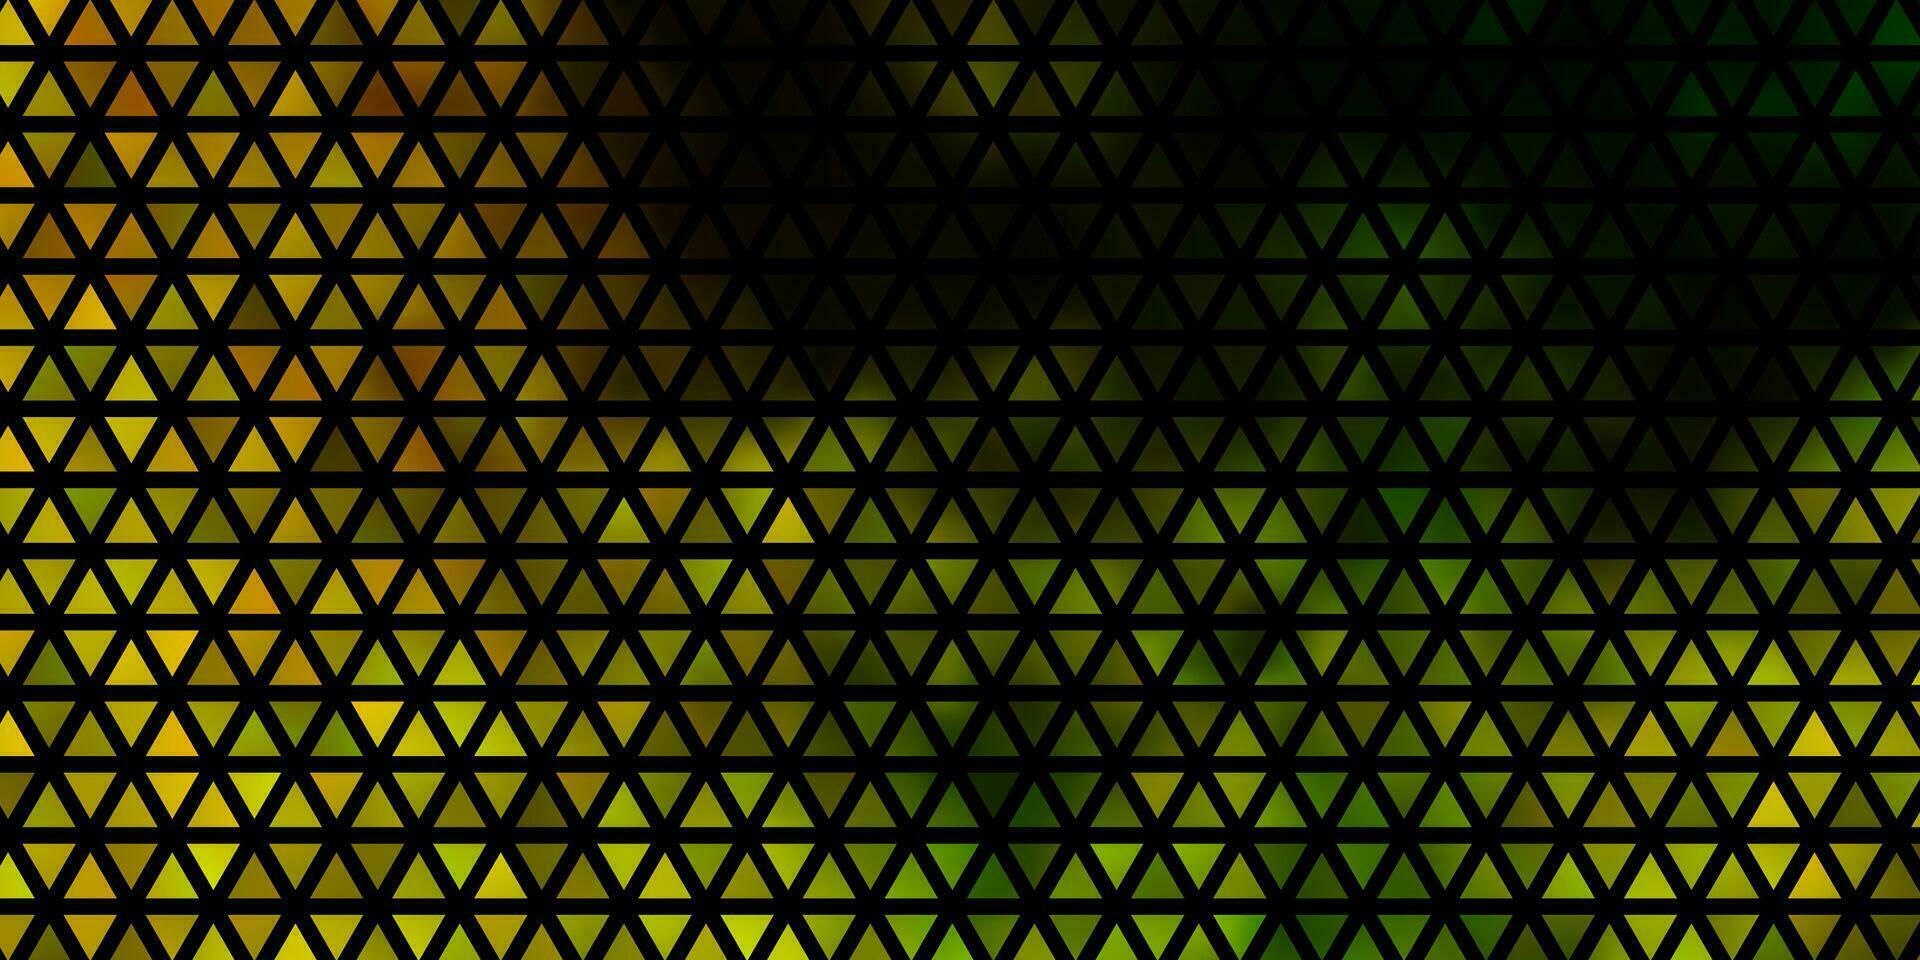 Light Green, Yellow vector background with polygonal style.